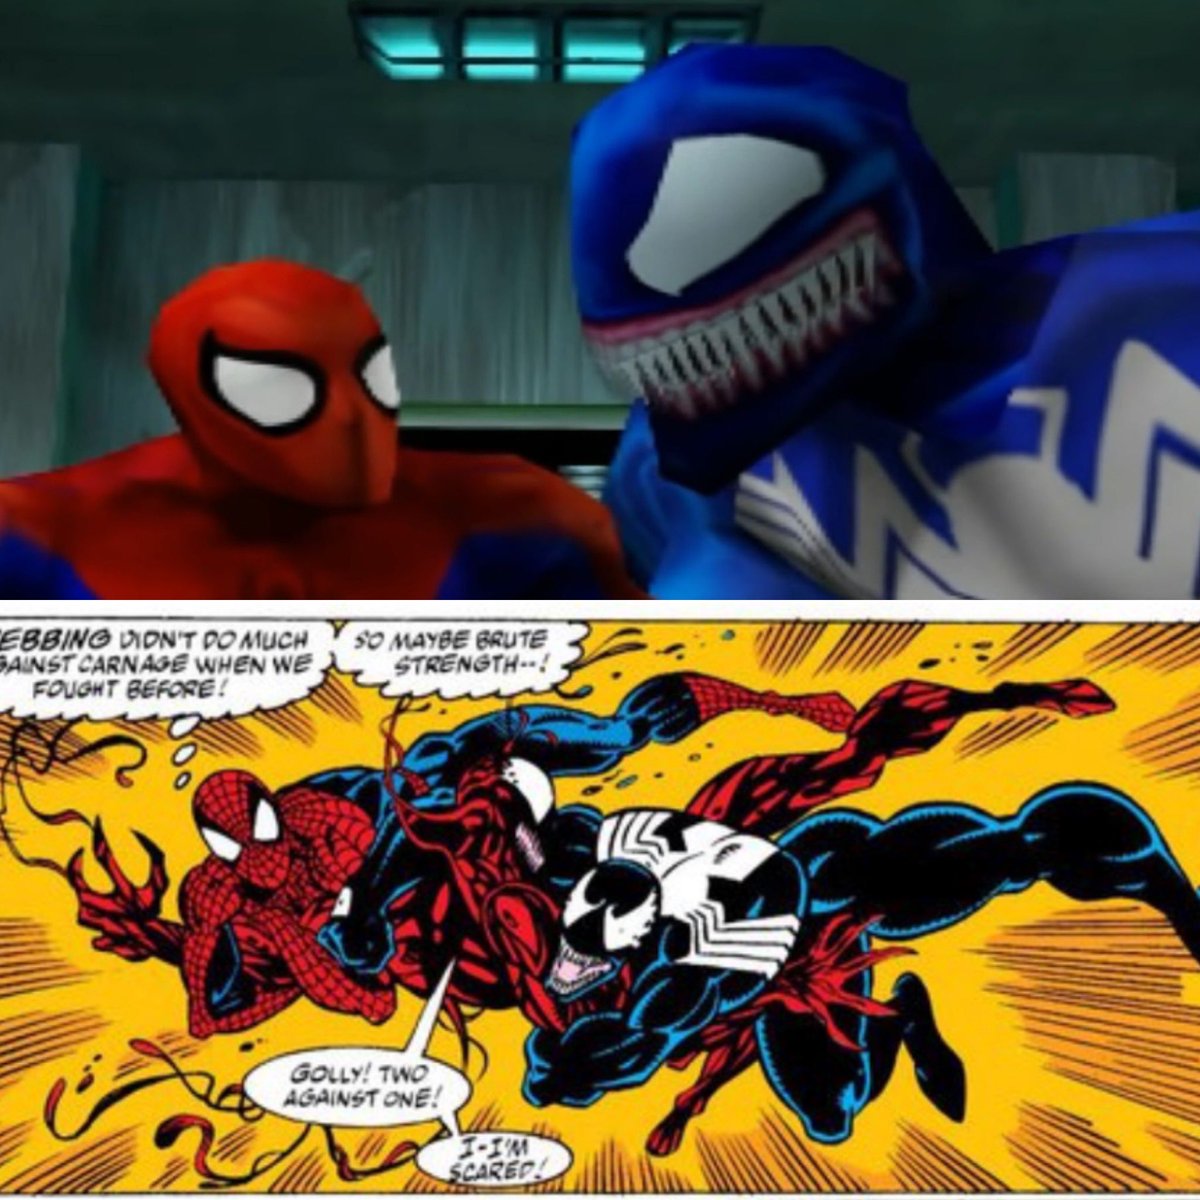 1 of the reasons Why I miss Spectacular Spider-man so much.
The dynamic of Eddie & Pete.
They started like brothers ala him & Harry but it worked its own way.
Eddie was still Jacked & his
trauma + rage let him get manipulated
& I Wanted them to rekindle & fight Carnage in S3